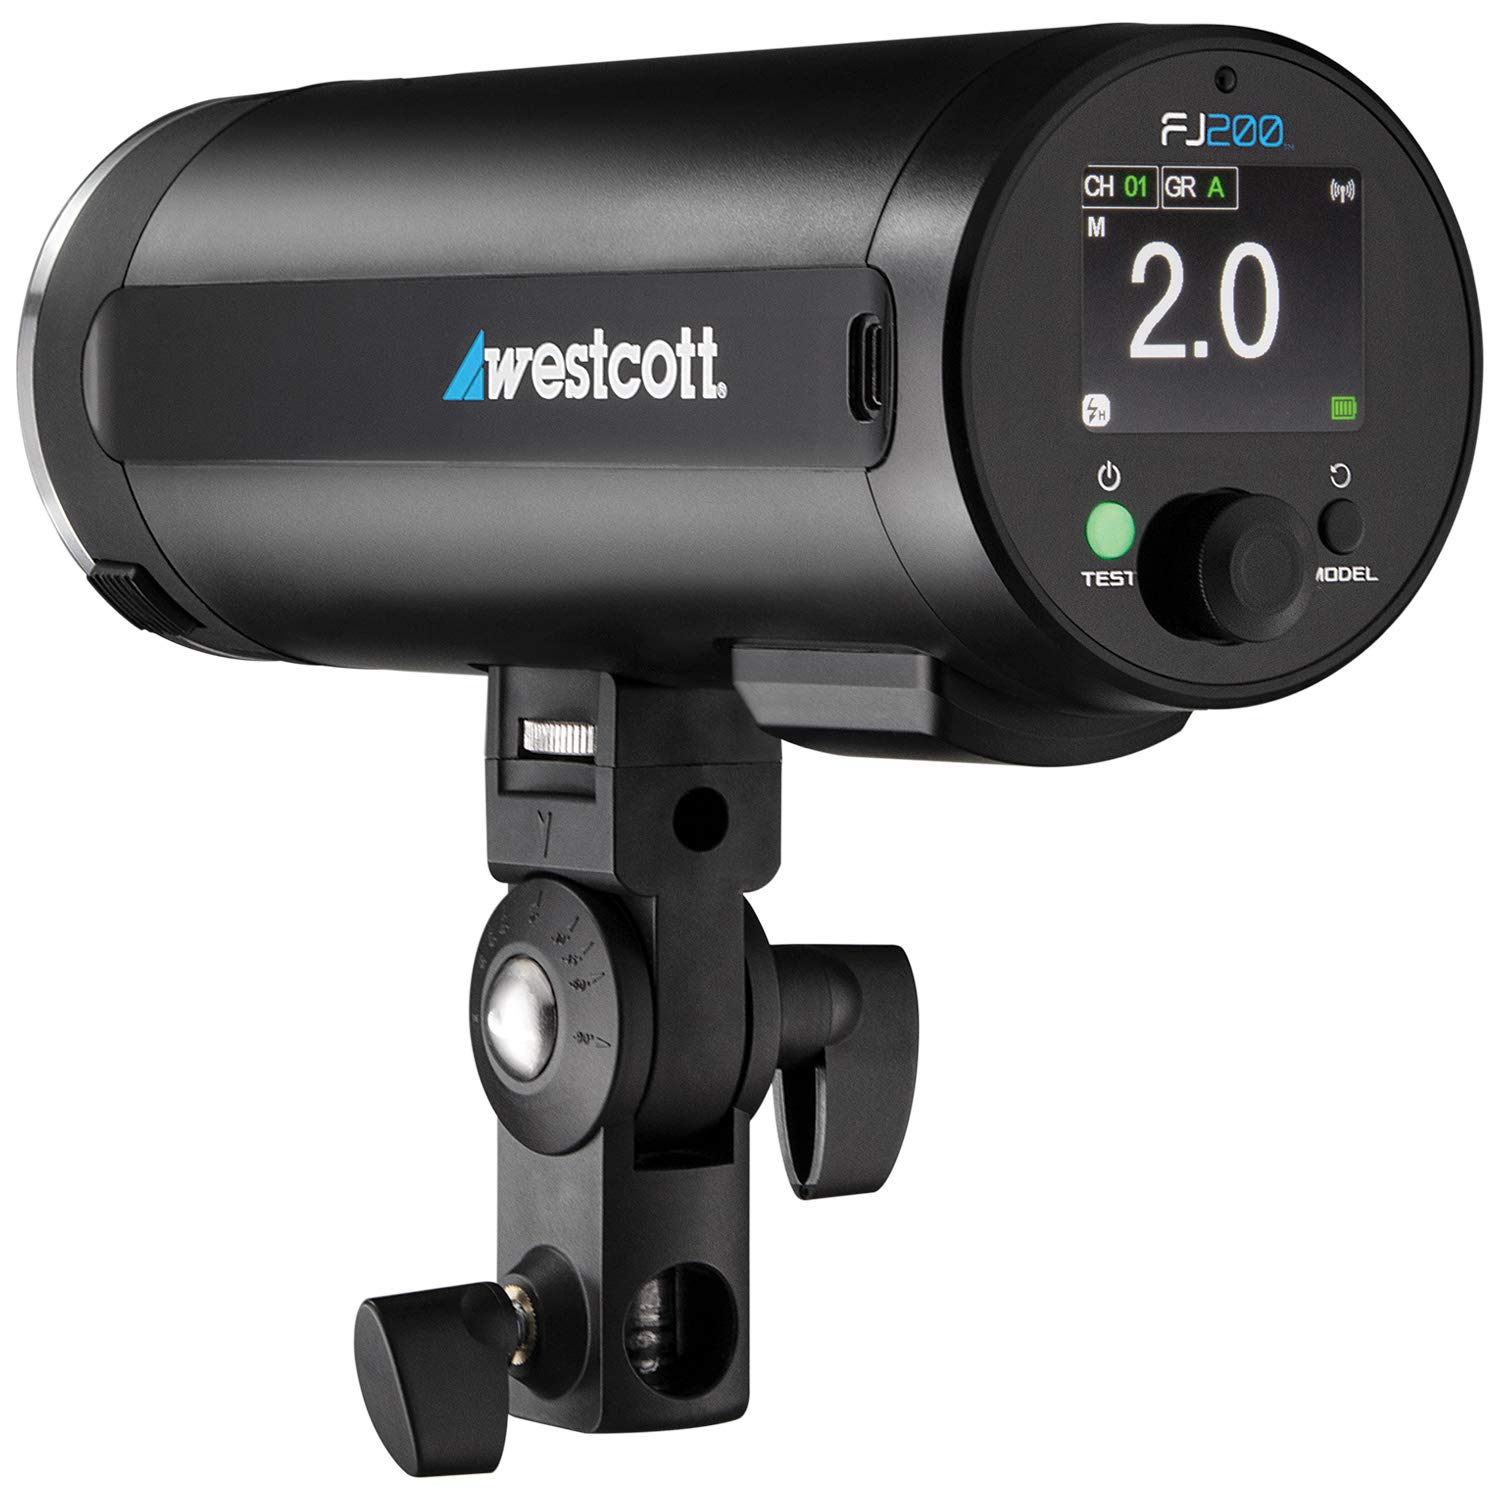 Westcott FJ200 Round Head Pocket Strobe with 1.3 sec. Recycle Time, TTL, HSS and Includes Tilter Bracket, 30-Degree Honeycomb Grid with Gel Clip and Travel Case